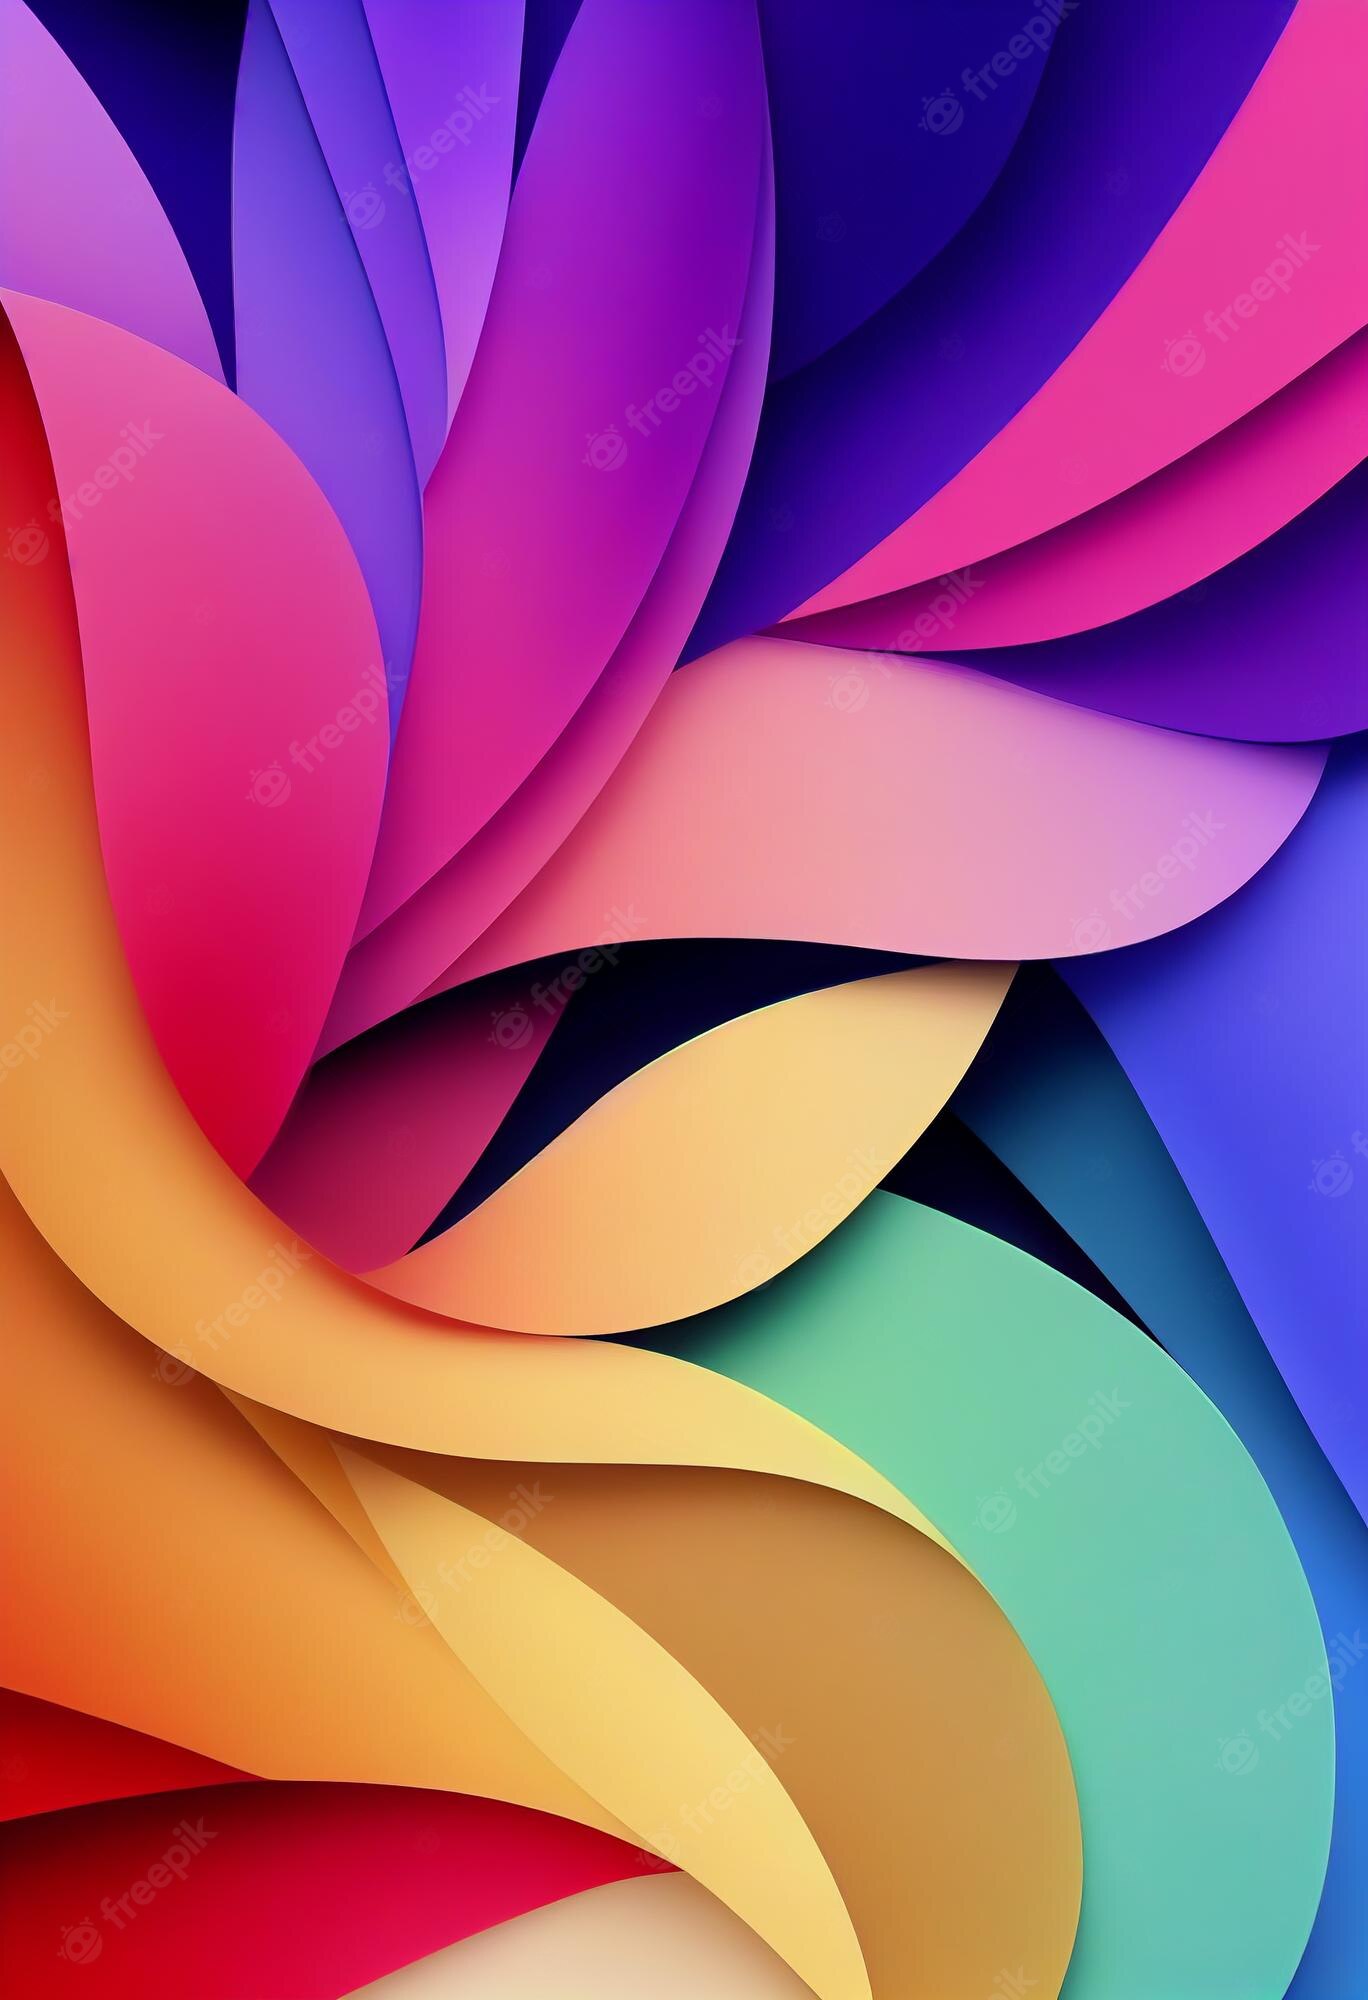 Premium Photo. Beautiful colorful abstract wallpaper 3D rendering